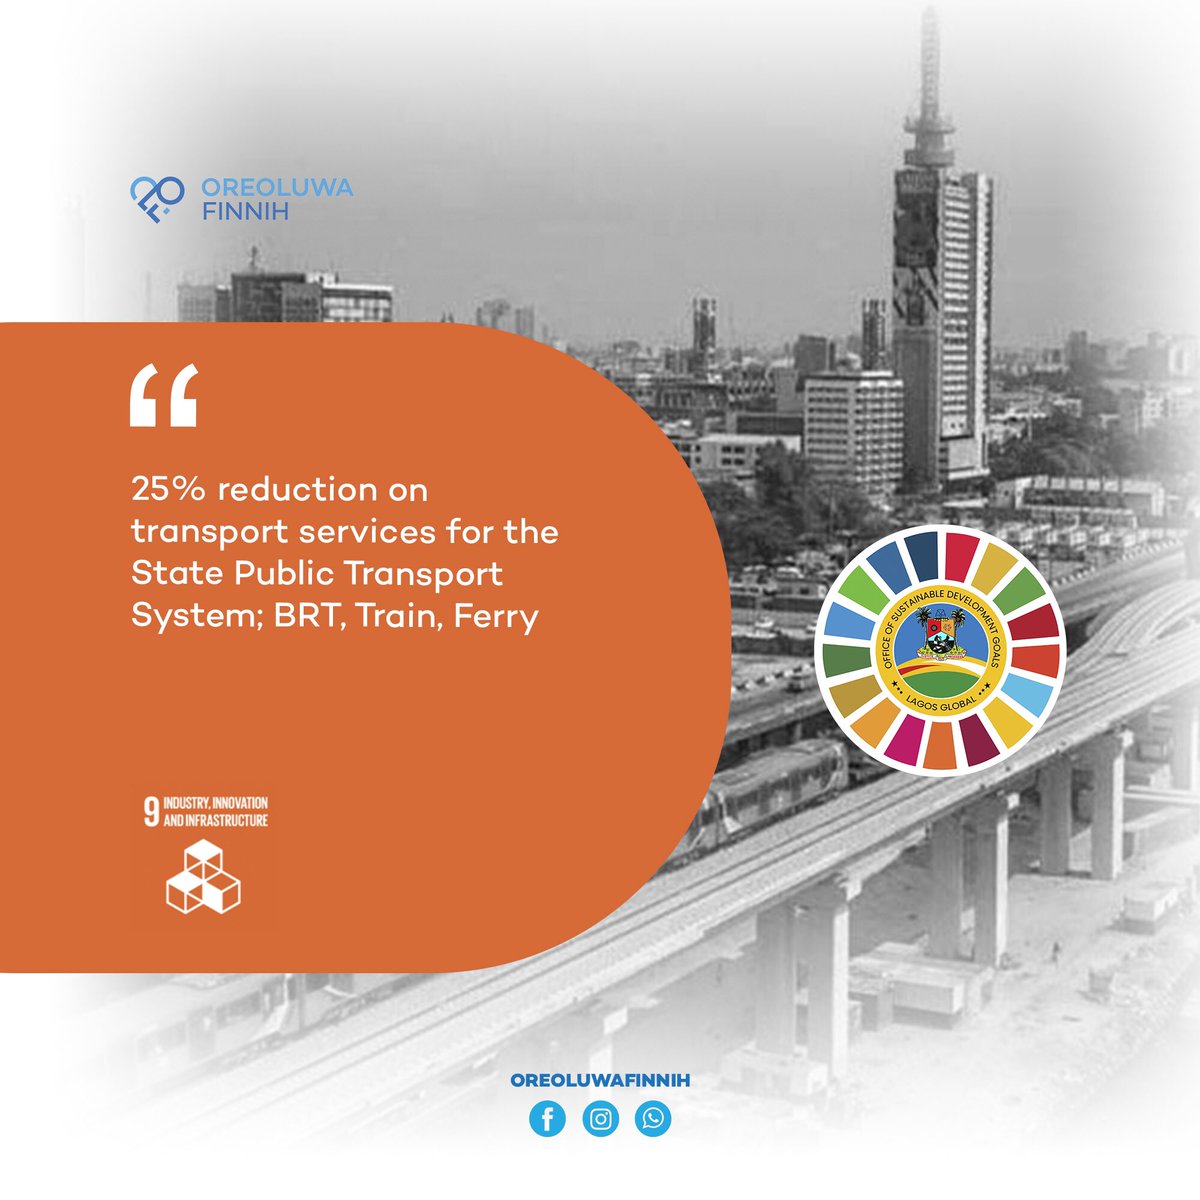 Lets innovate for a better future! #SDG9 #InfrastructureMatters #InnovationForAll